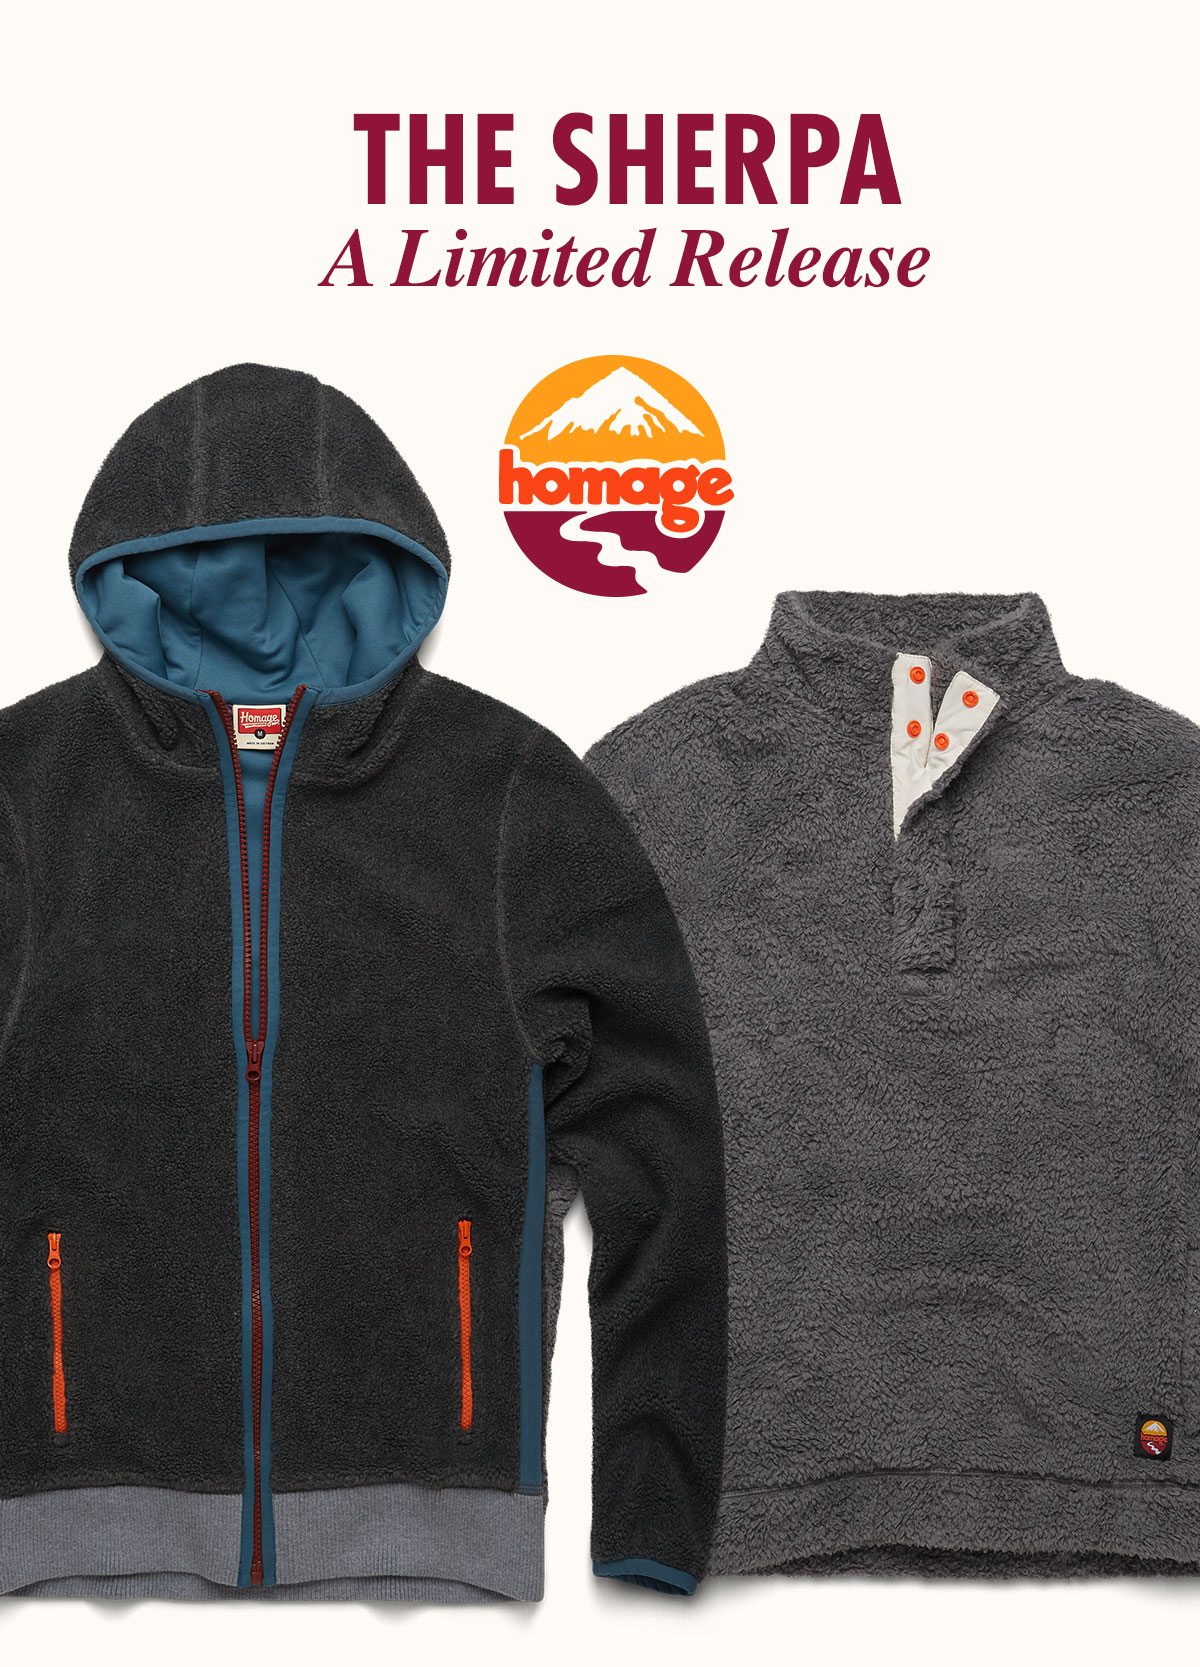 HOMAGE Outdoor | The Sherpa, A Limited Release